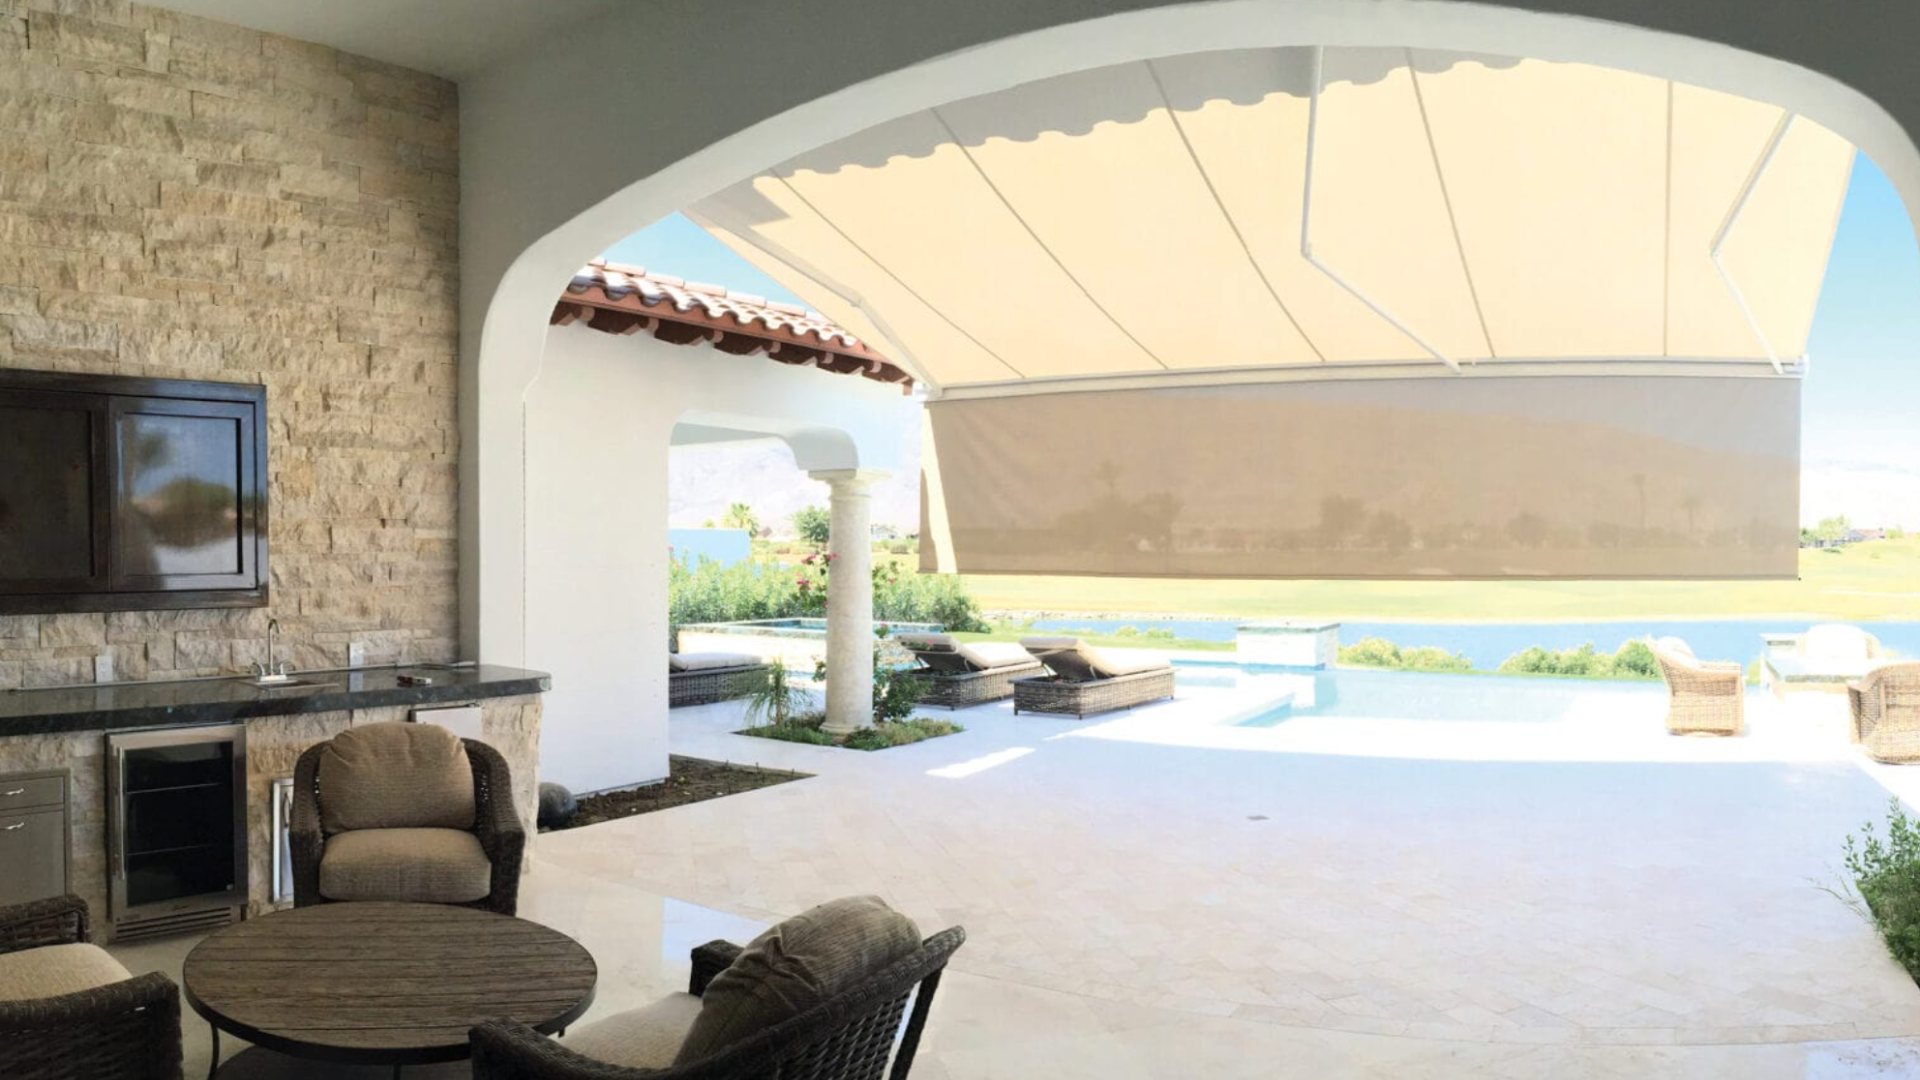 Reasons to Add a Drop Screen to Your Retractable Awning